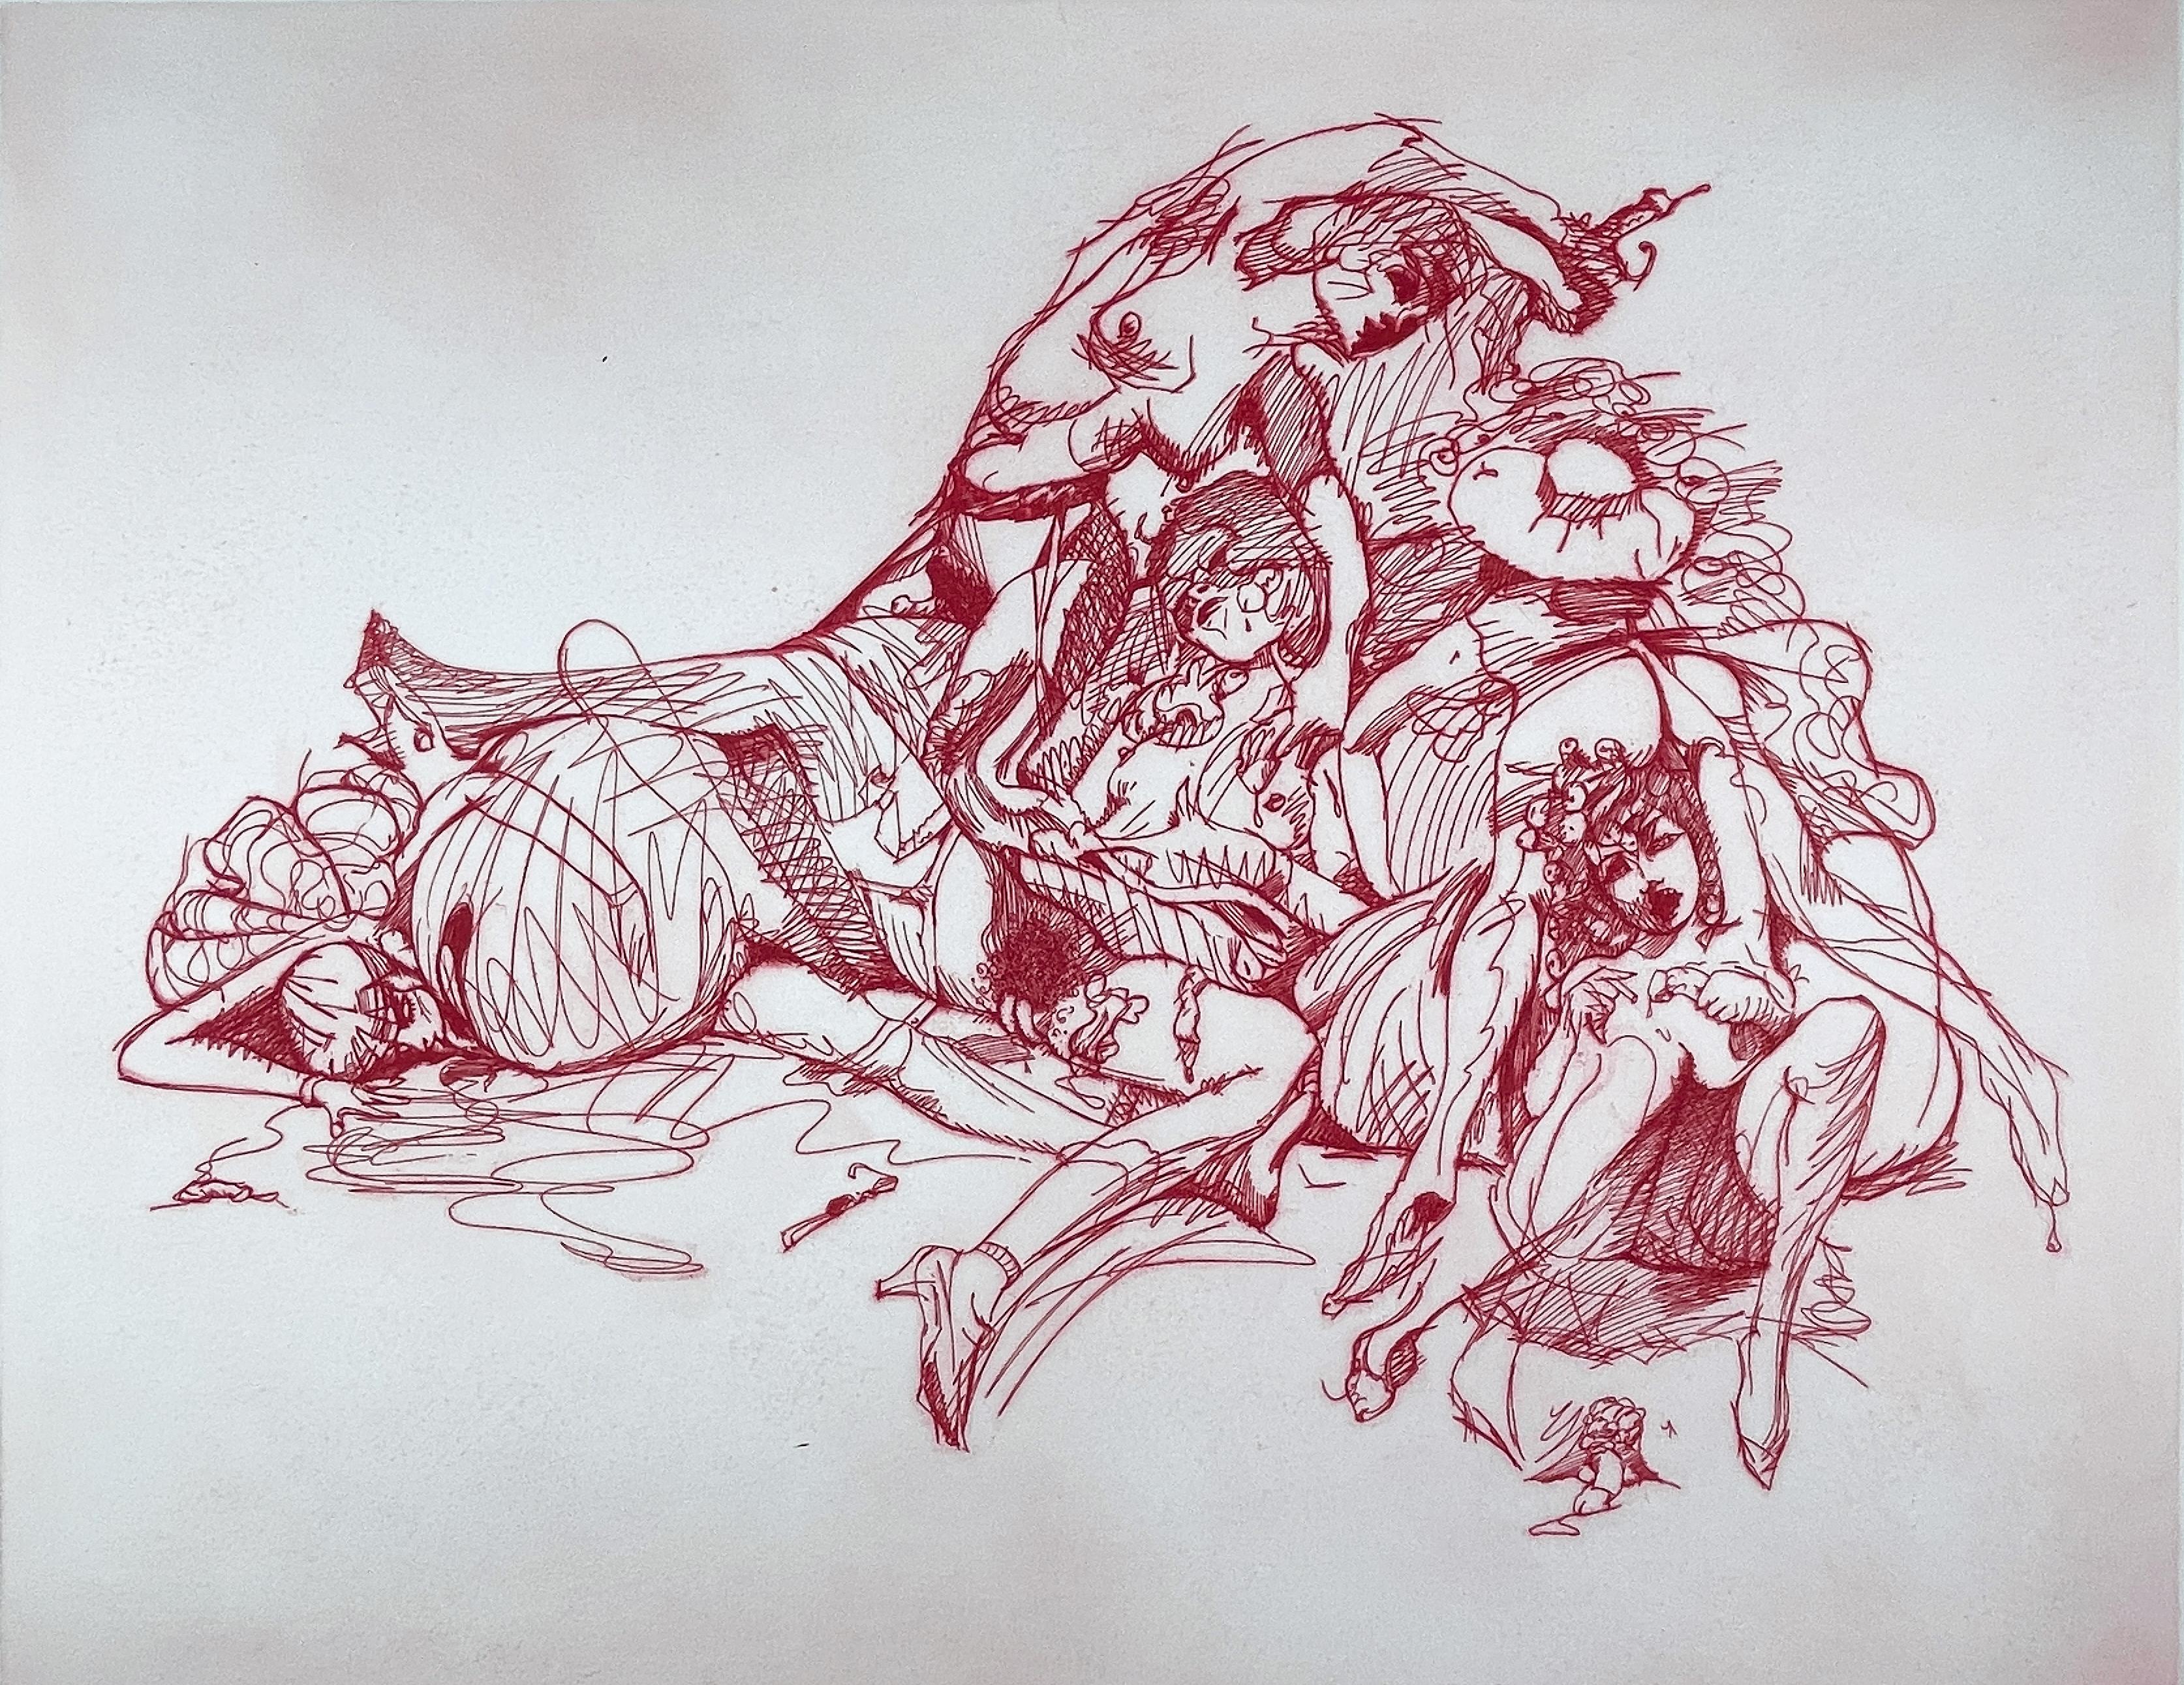 This sensuous and playful scene is characteristic of Oldenburg’s printmaking ouevre: a veritable heap of women displaying various expressions of ecstasy and repose. The loose sketches were drawn directly onto the plate by the artist, a master